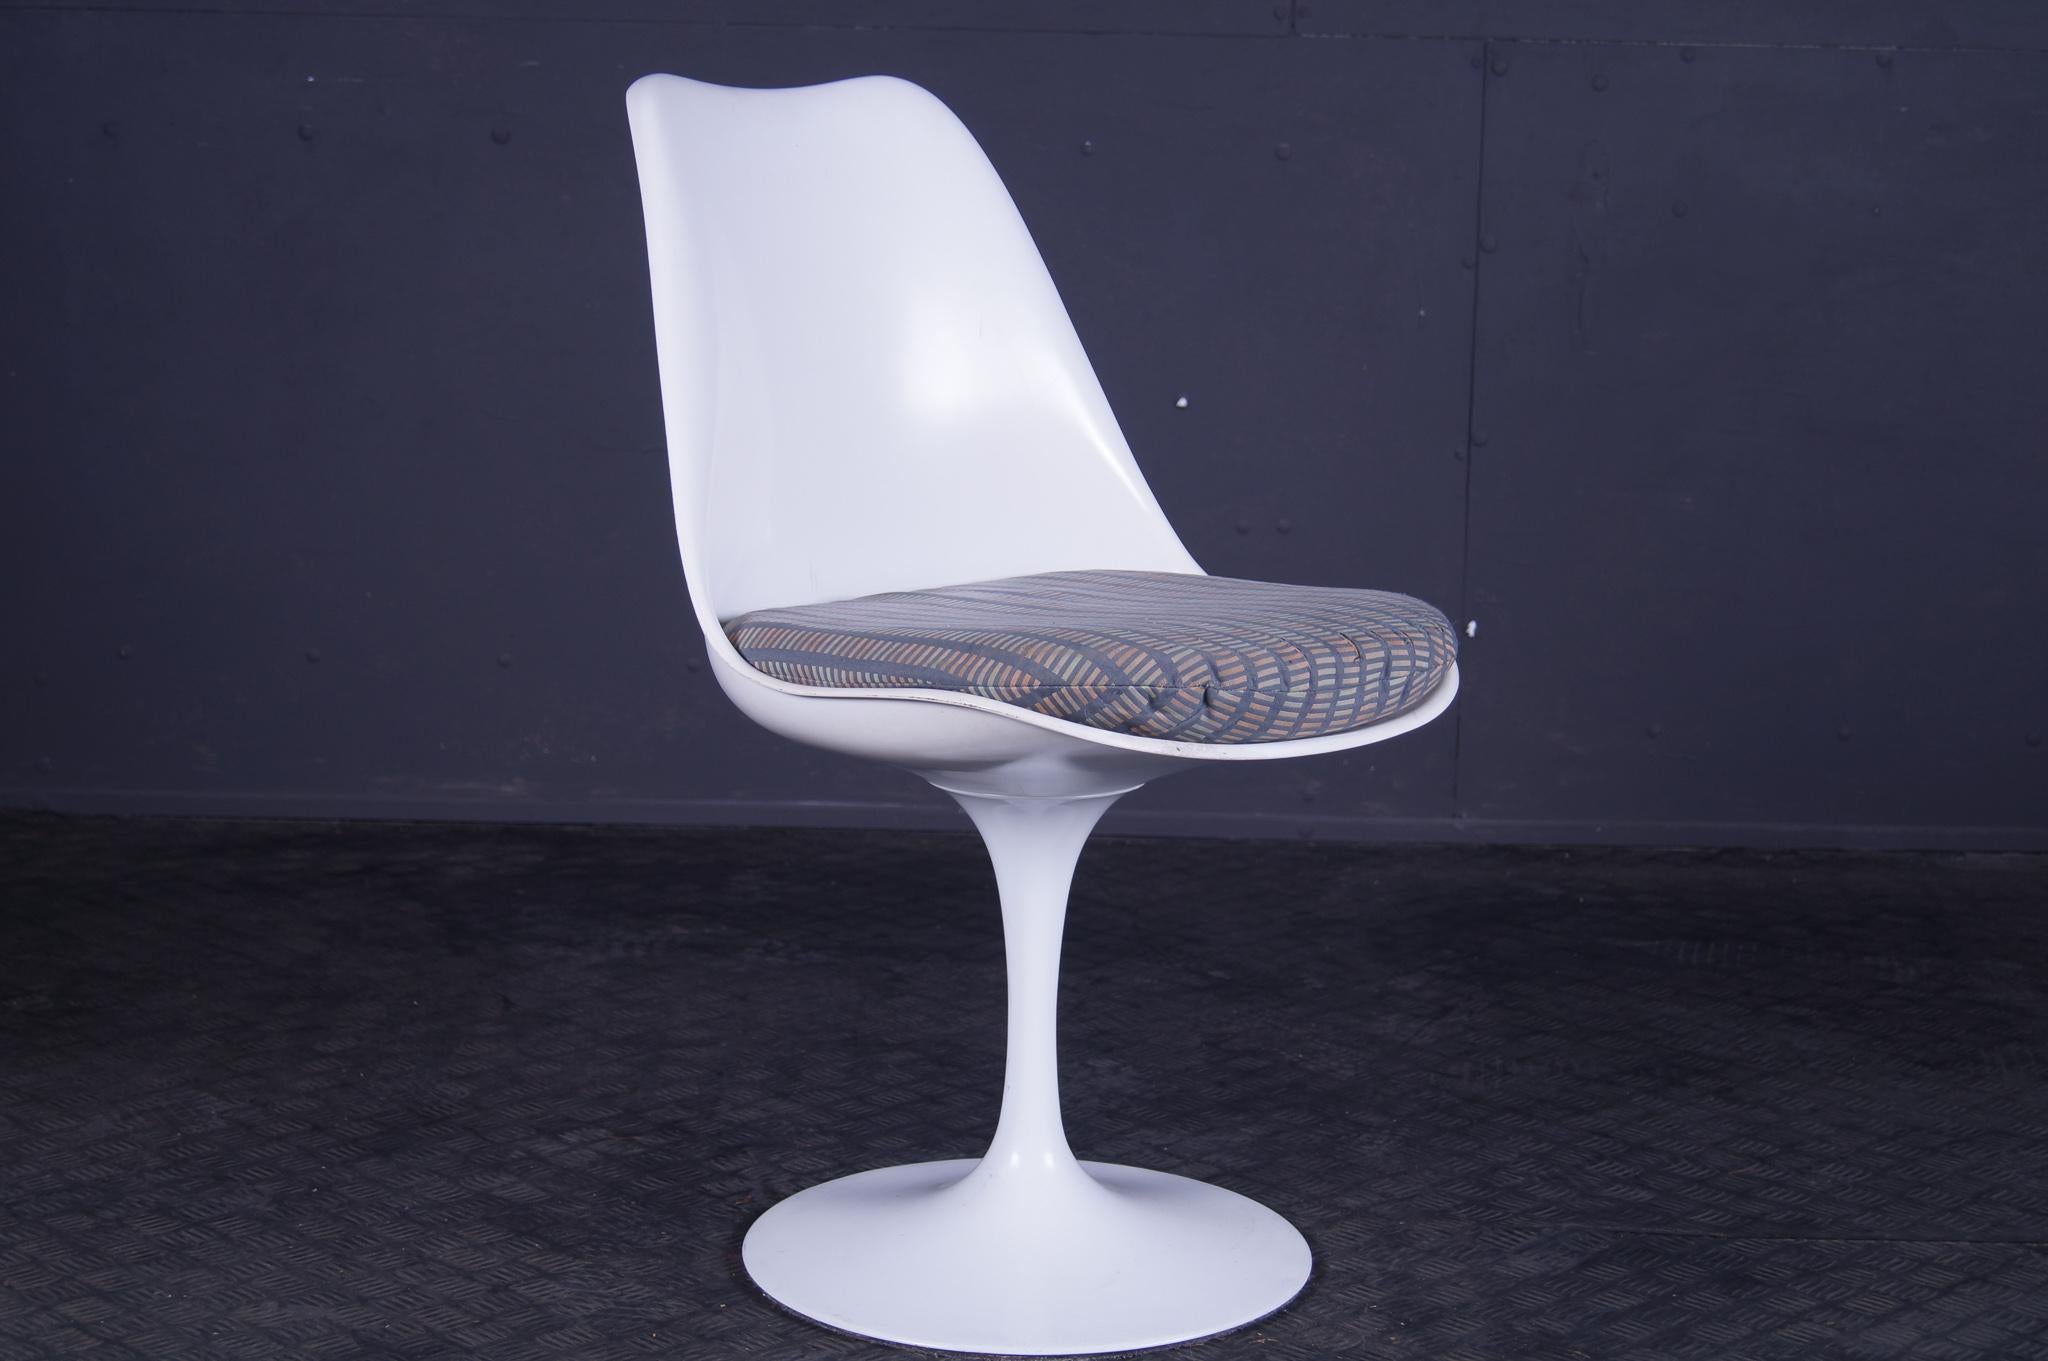 Vintage tulip chair by Eero Saarinen
 
Chair model 'Tulip' clear white metal with a finish. Fixed shell is filled with an updated, removable cushion with an Space Age fabric. The 'Tulip' is a mythical chair from the 1950s. It was designed in 1956